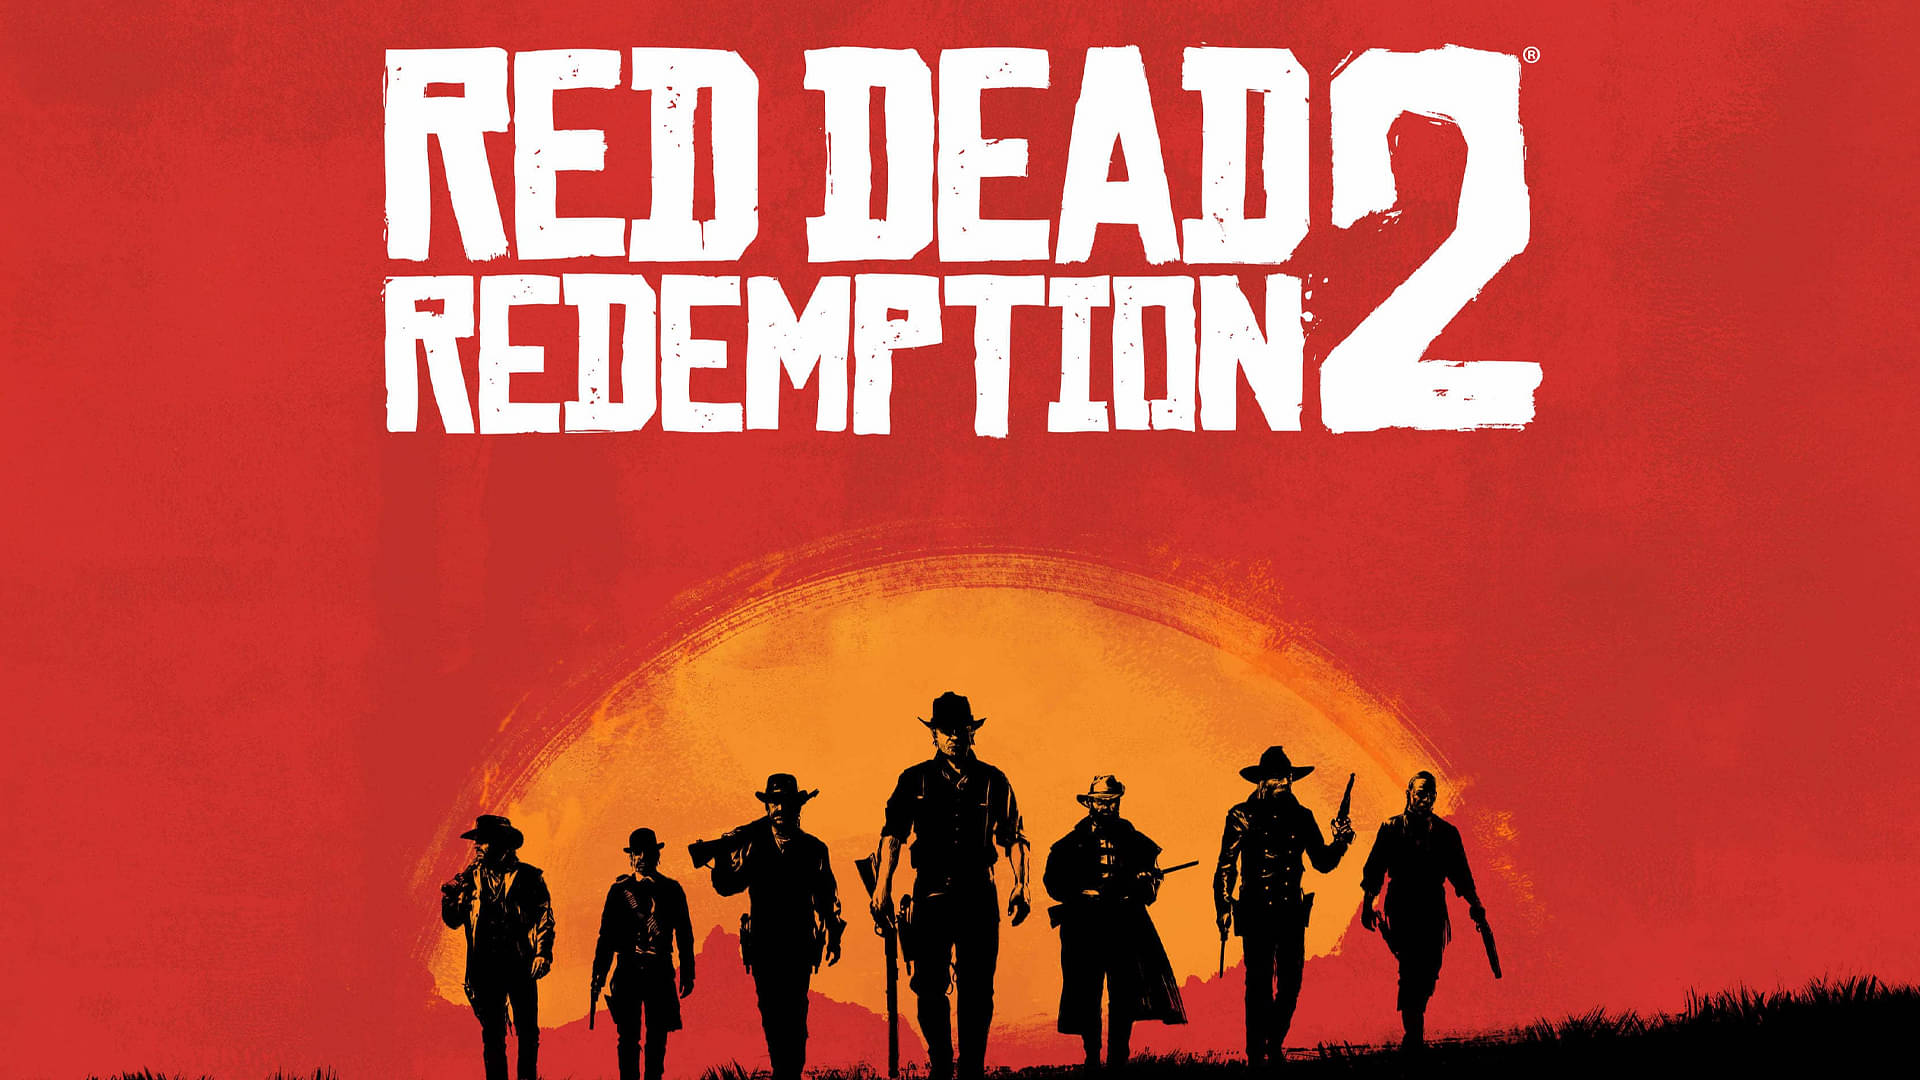 Red Dead Redemption 2 is one of the best story games on Steam